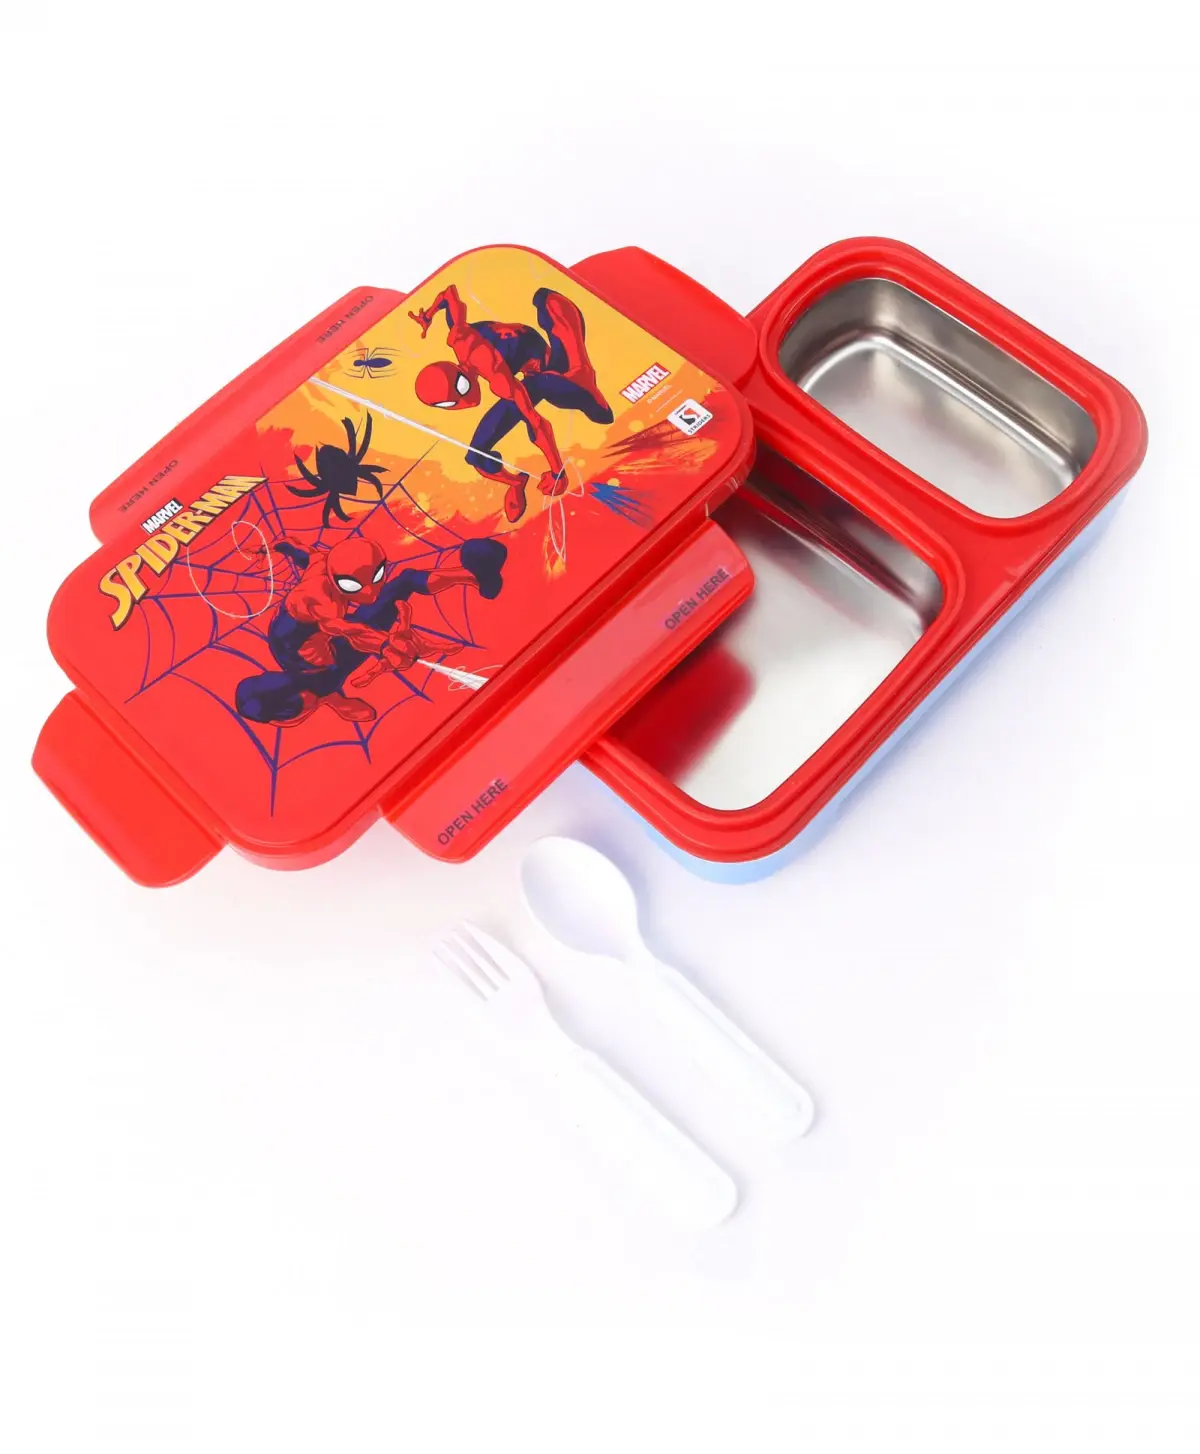 Striders Spiderman Lunch Box The Ultimate Heroic Mealtime Companion, 3Y+, Multicolour